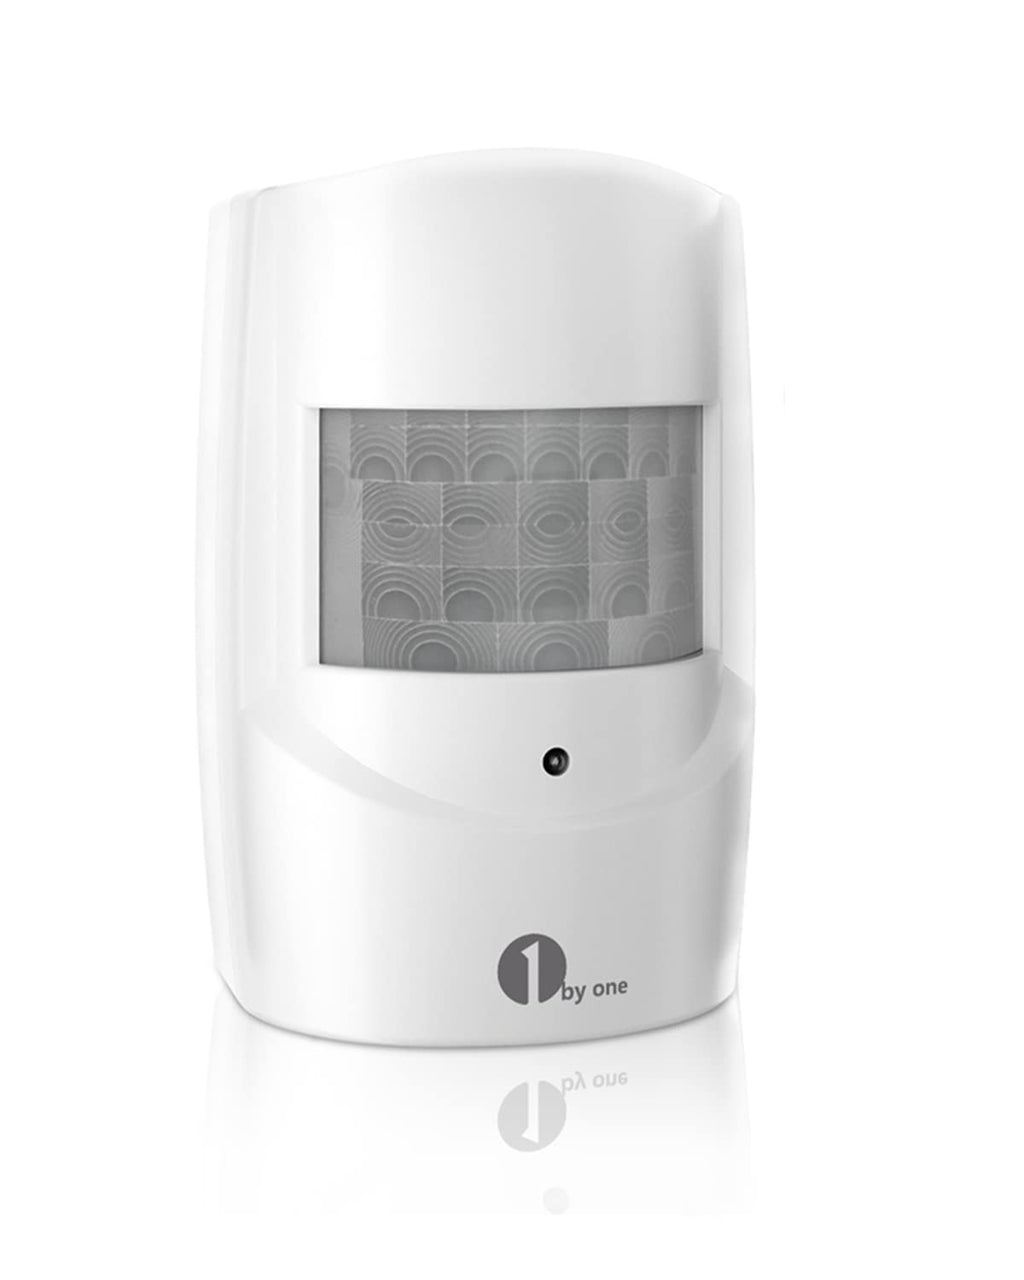  [AUSTRALIA] - Driveway Alarm, 1byone Motion Sensor Home Security Alert System with 36 Melodies, 1 Weatherproof PIR Motion Detector, 1000ft Wireless Transmission Range and 24ft PIR Detection Range Single Sensor